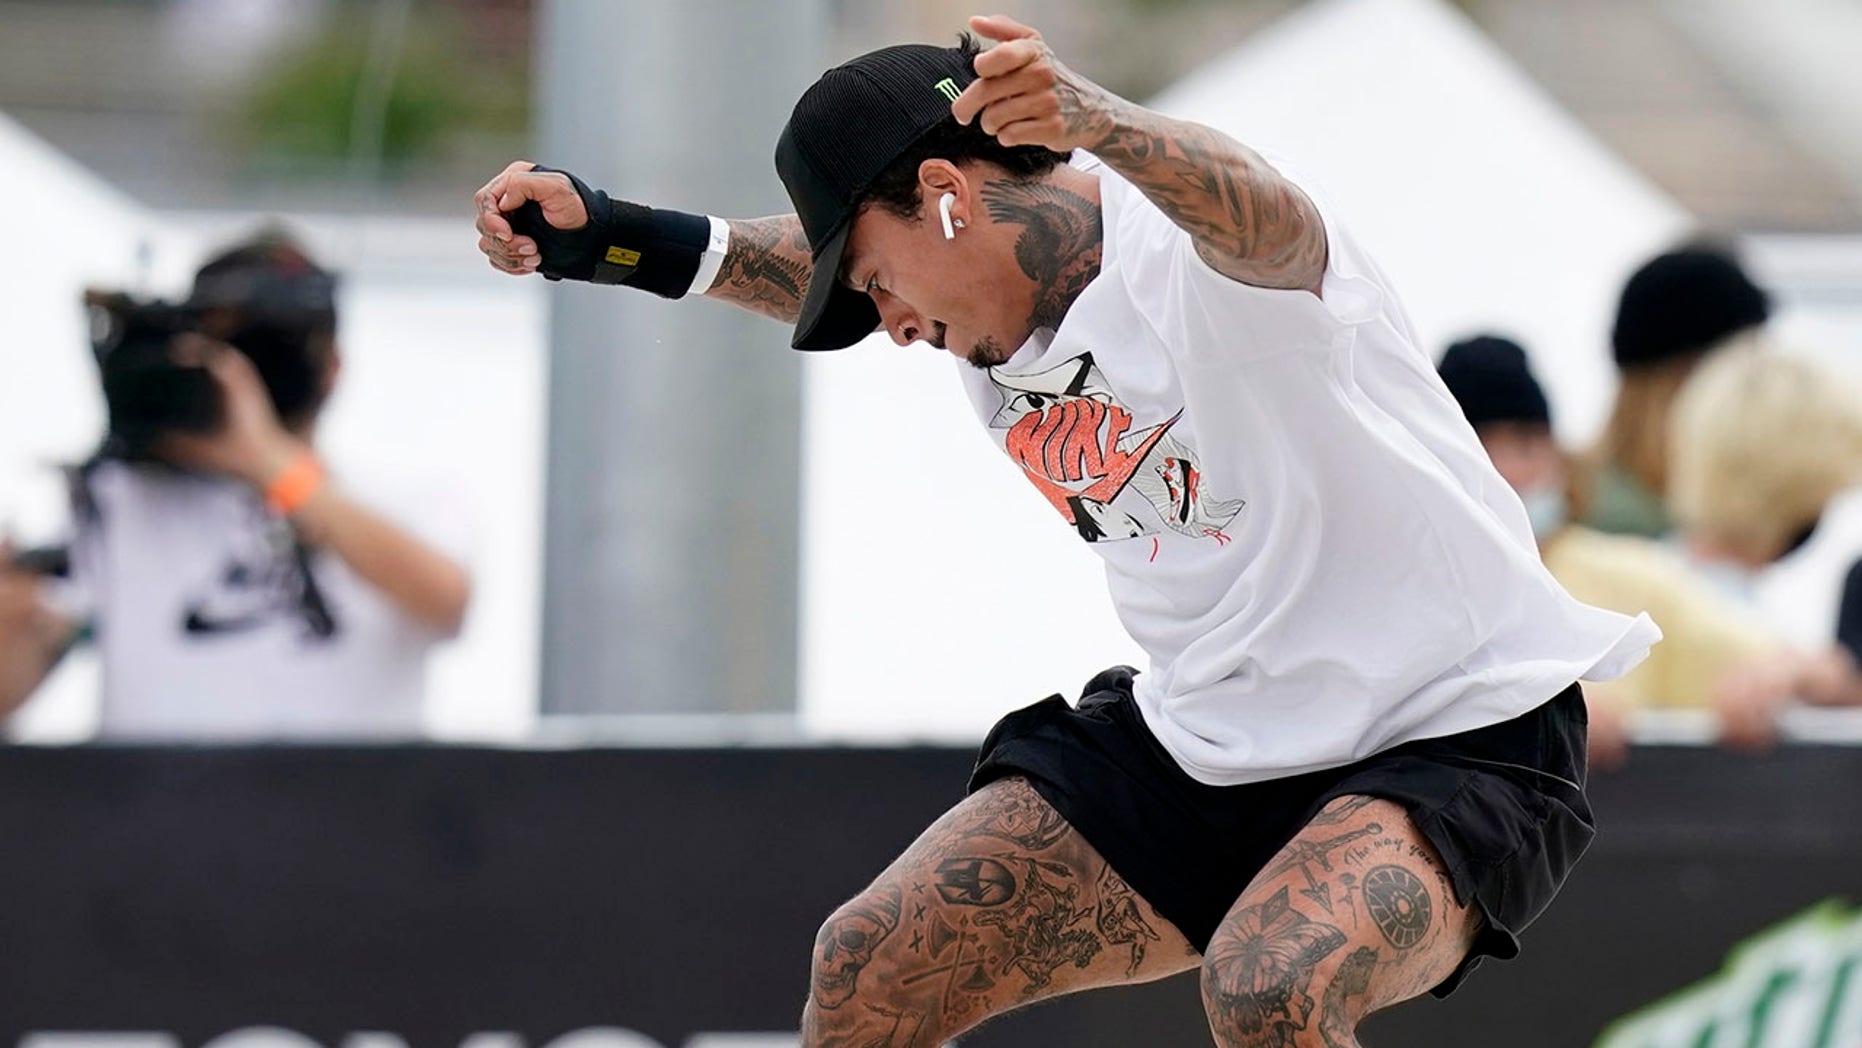 Nyjah Huston, of the United States, practices during an Olympic qualifying skateboard event at Lauridsen Skatepark in Des Moines, Iowa. Where some skateboarders might be reluctant to move so boldly into the gargantuan realm of the Olympics, Huston is more